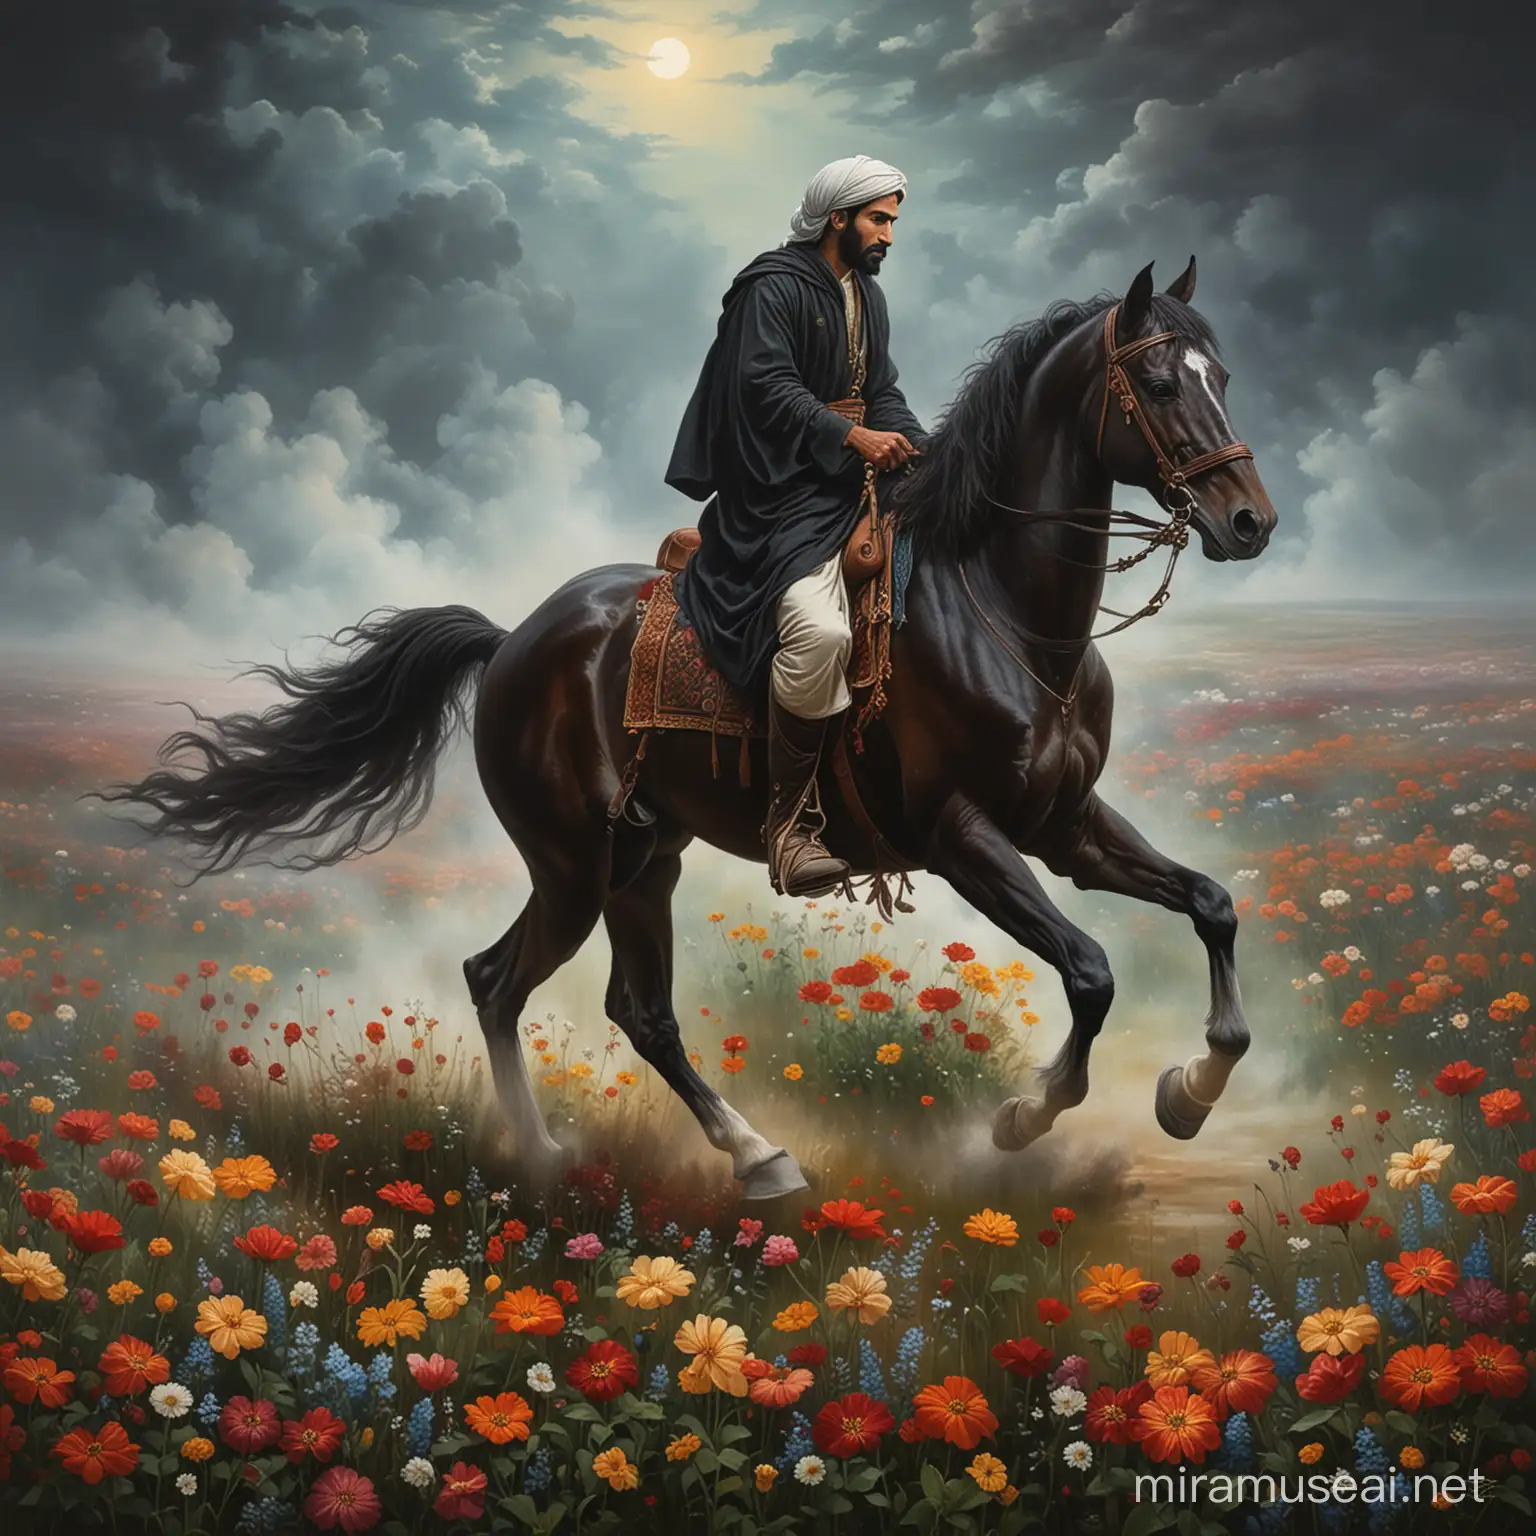 Imam Hussain Riding Through Night Mist in Impressionistic Field of Flowers